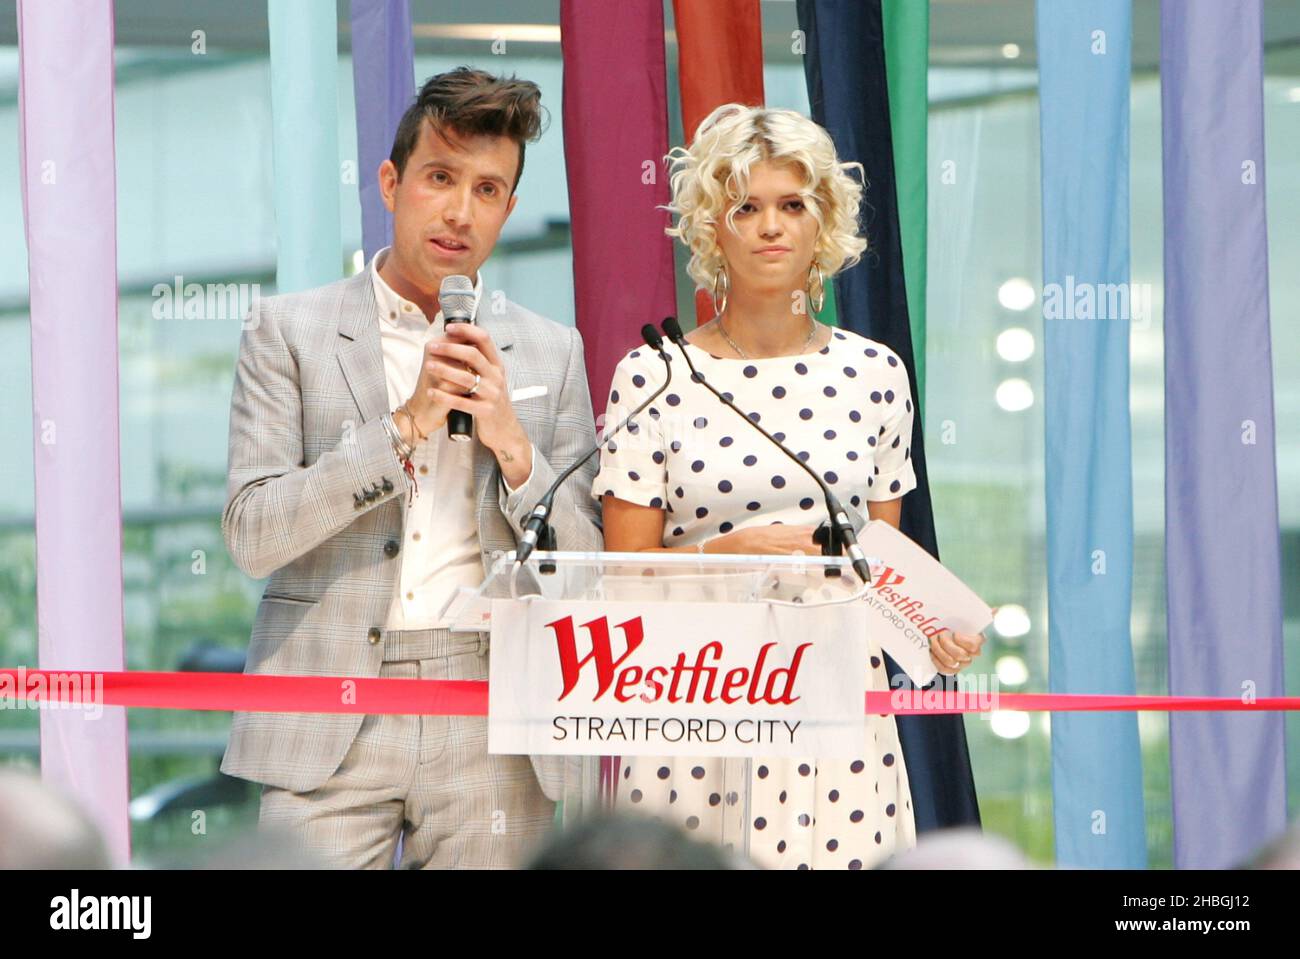 Pixie Geldof and Nick Grimshaw during the launch of the Westfield Stratford City, London Stock Photo